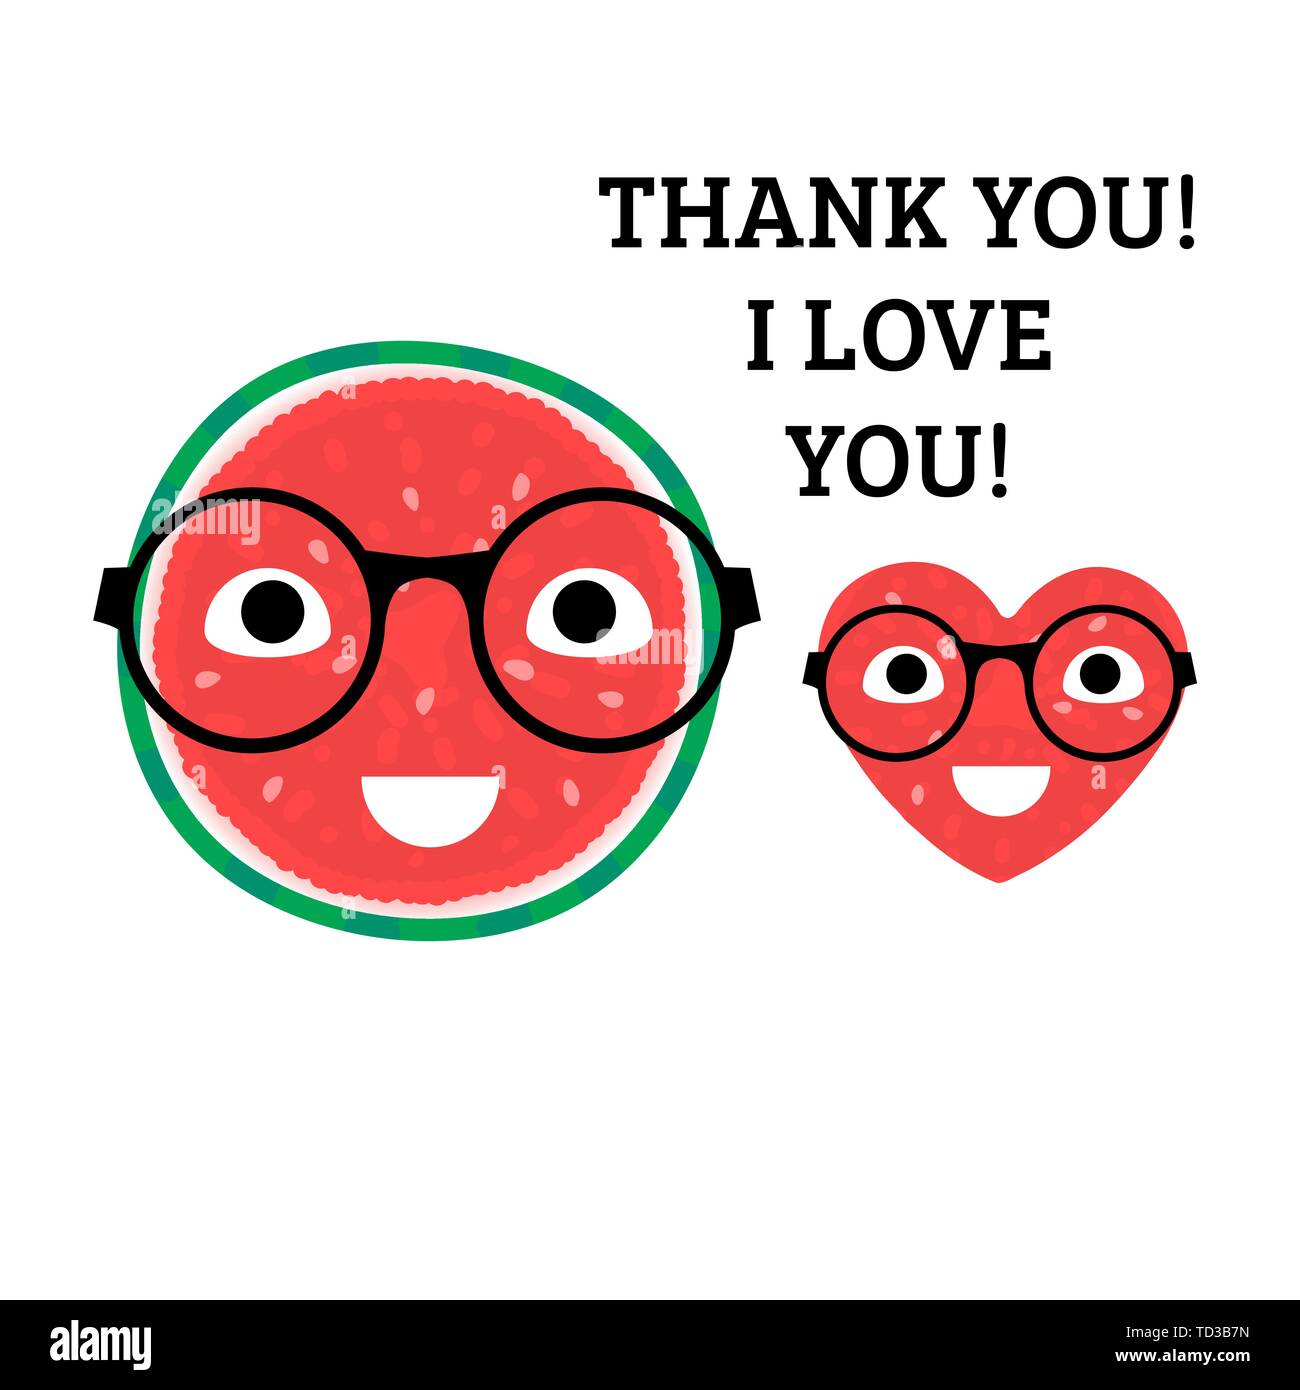 Watermelon cute characters big and heart with glasses. Thank you. I love you. Stock Vector